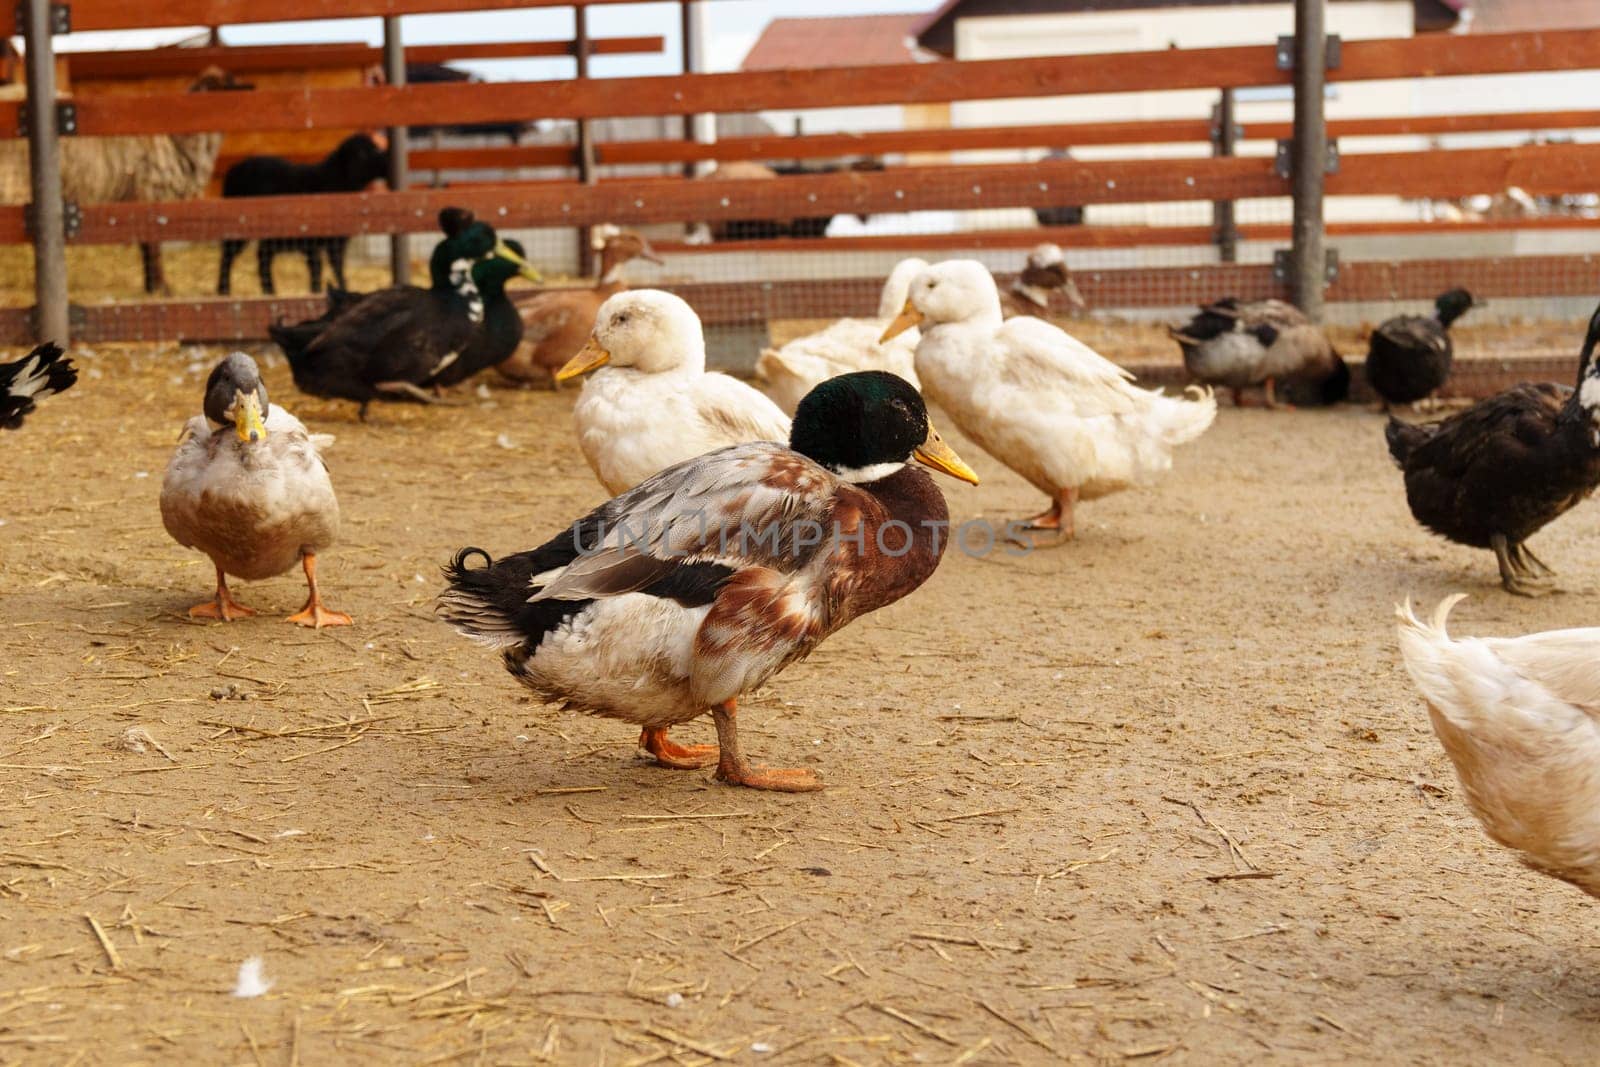 Ducks Wandering in a Farmyard at Daytime. Selective focus by darksoul72